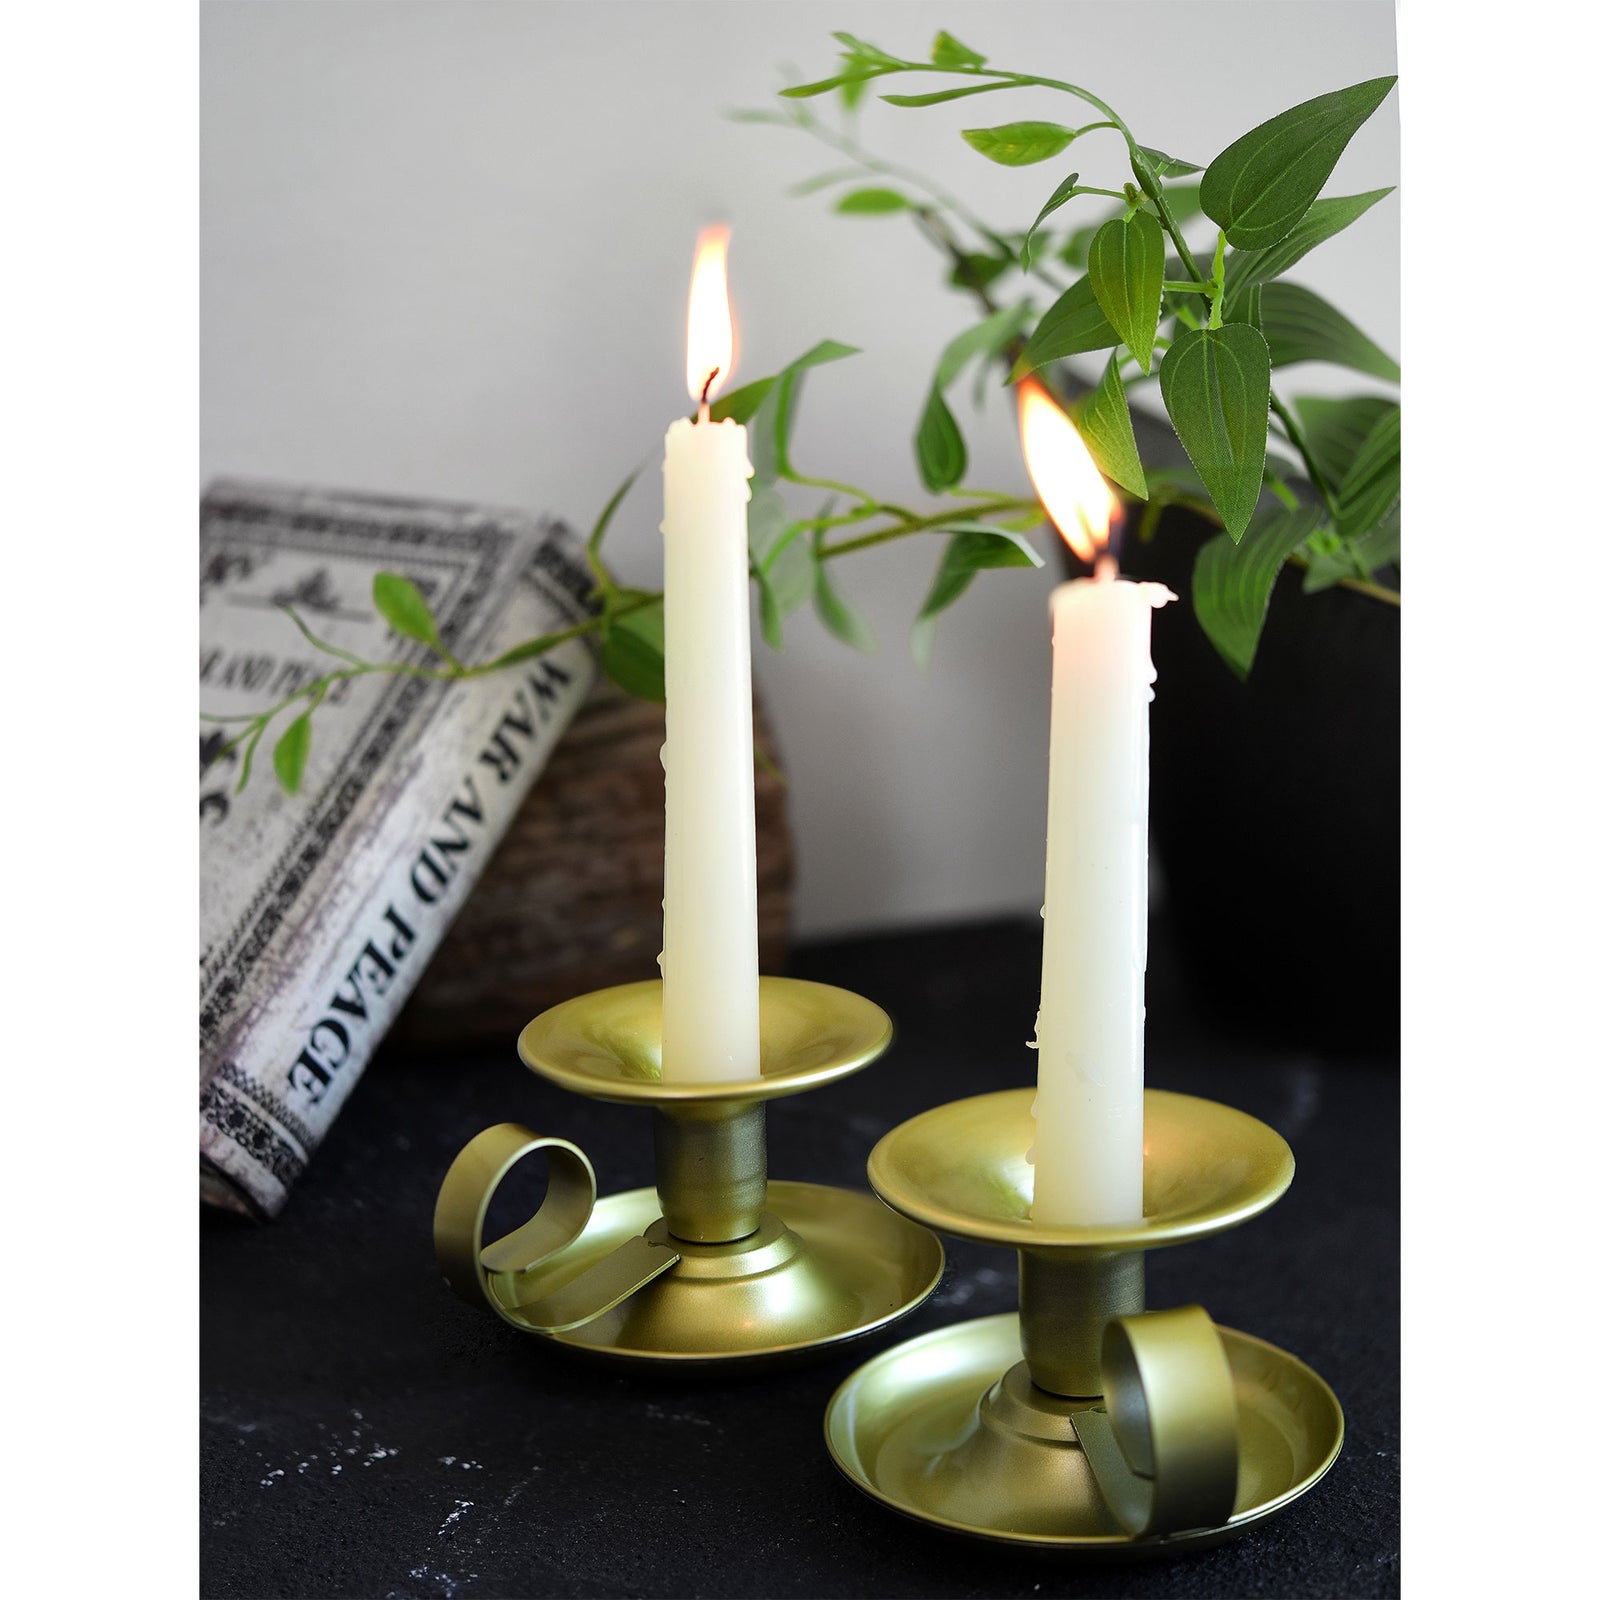 2 Gold Plated Iron Saucer Vintage Iron Candle Holders with Handle for Taper Wax Candlesticks